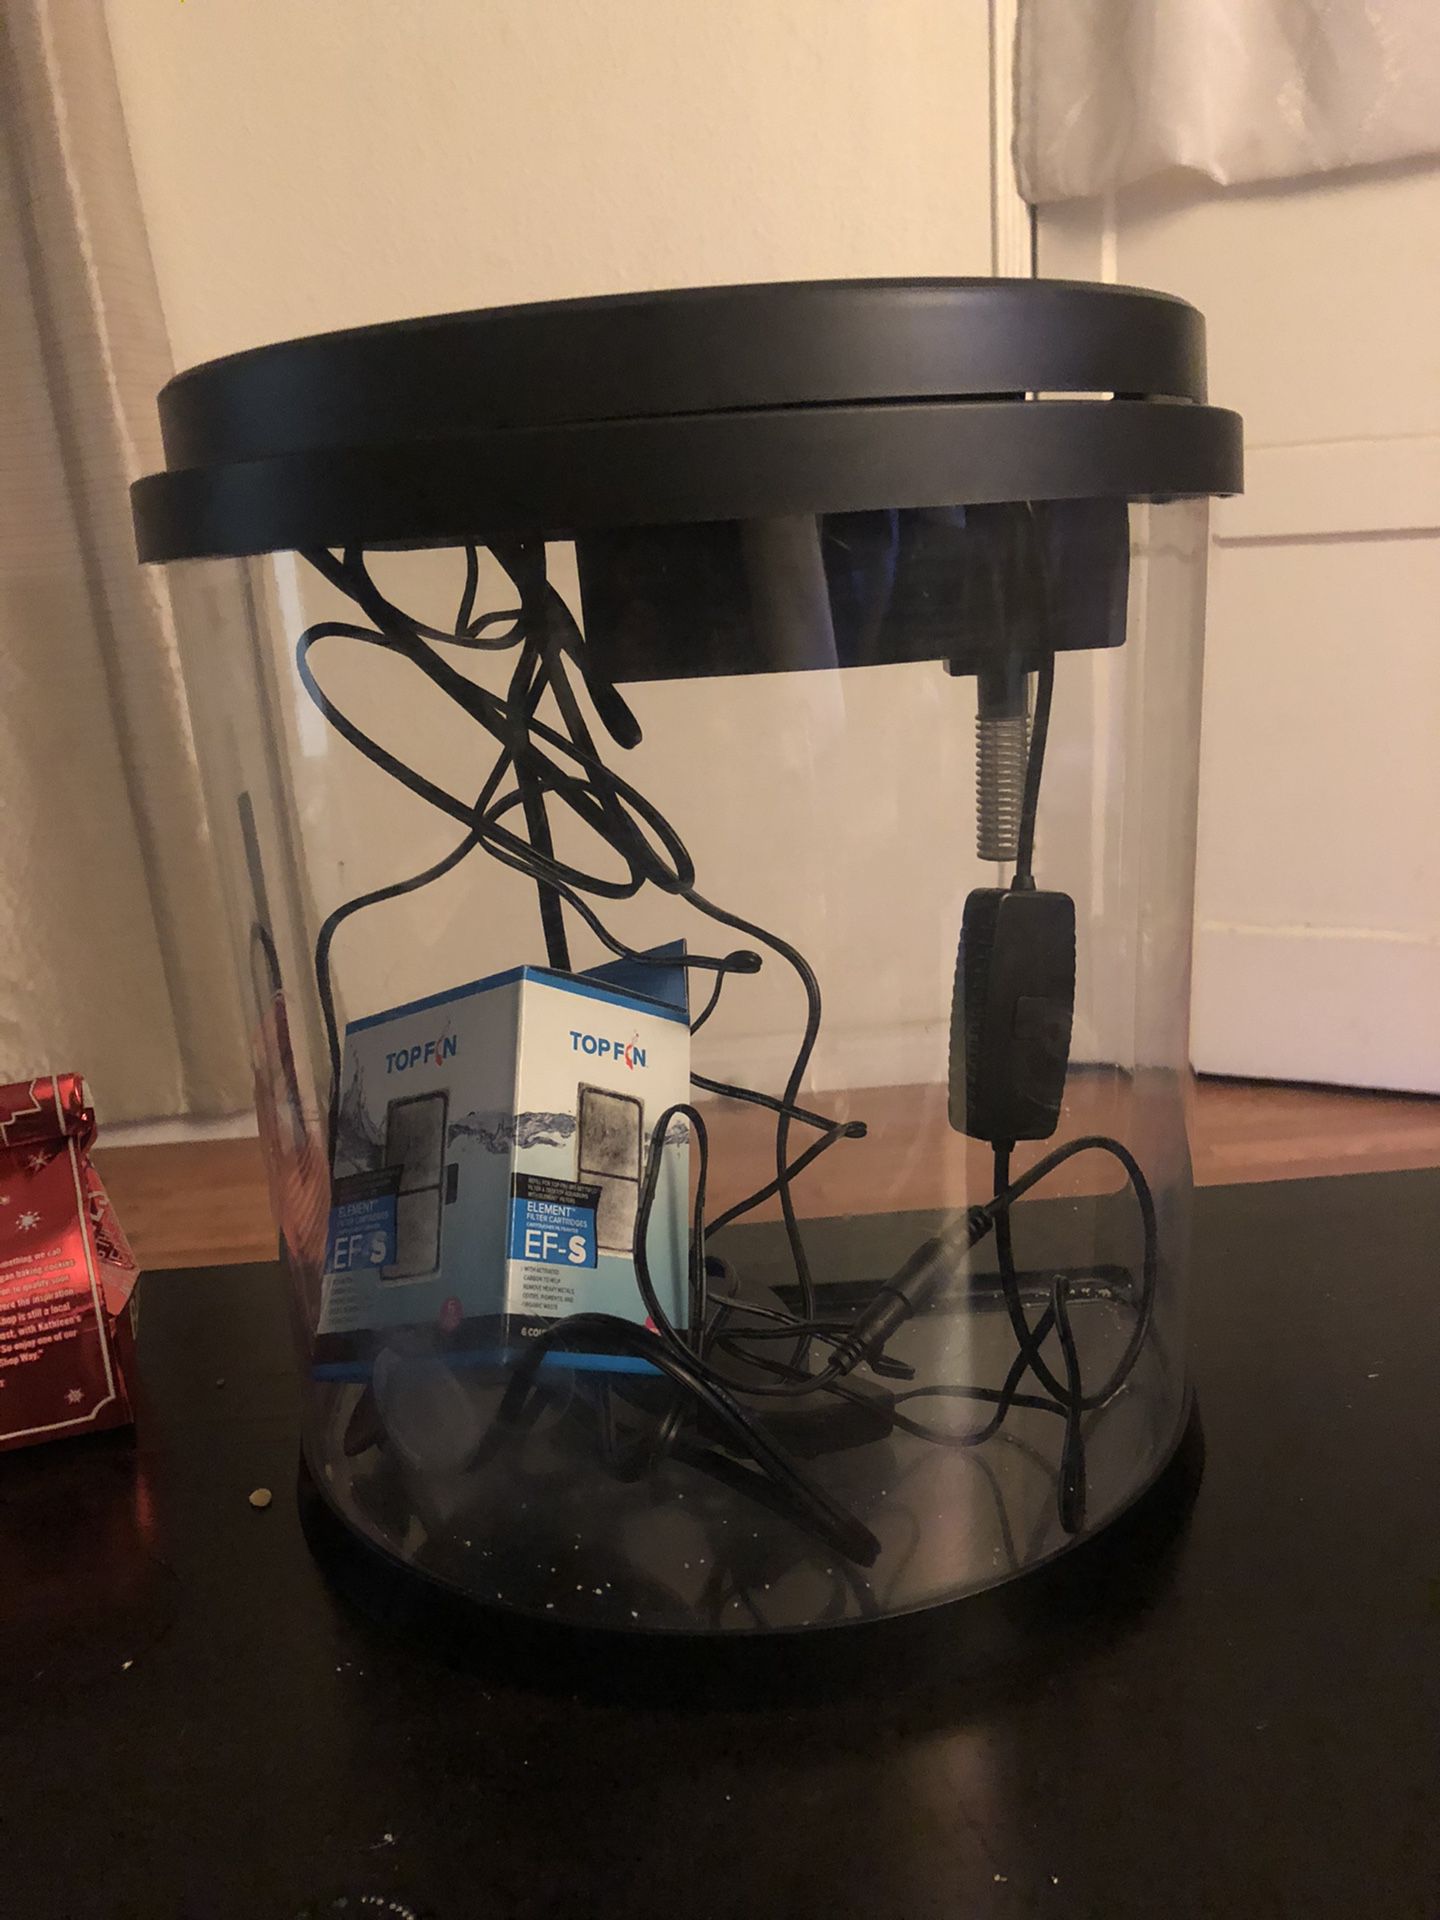 3.5 Gal Tank With Heater And Brand New Box Of Filters (6 Pack)